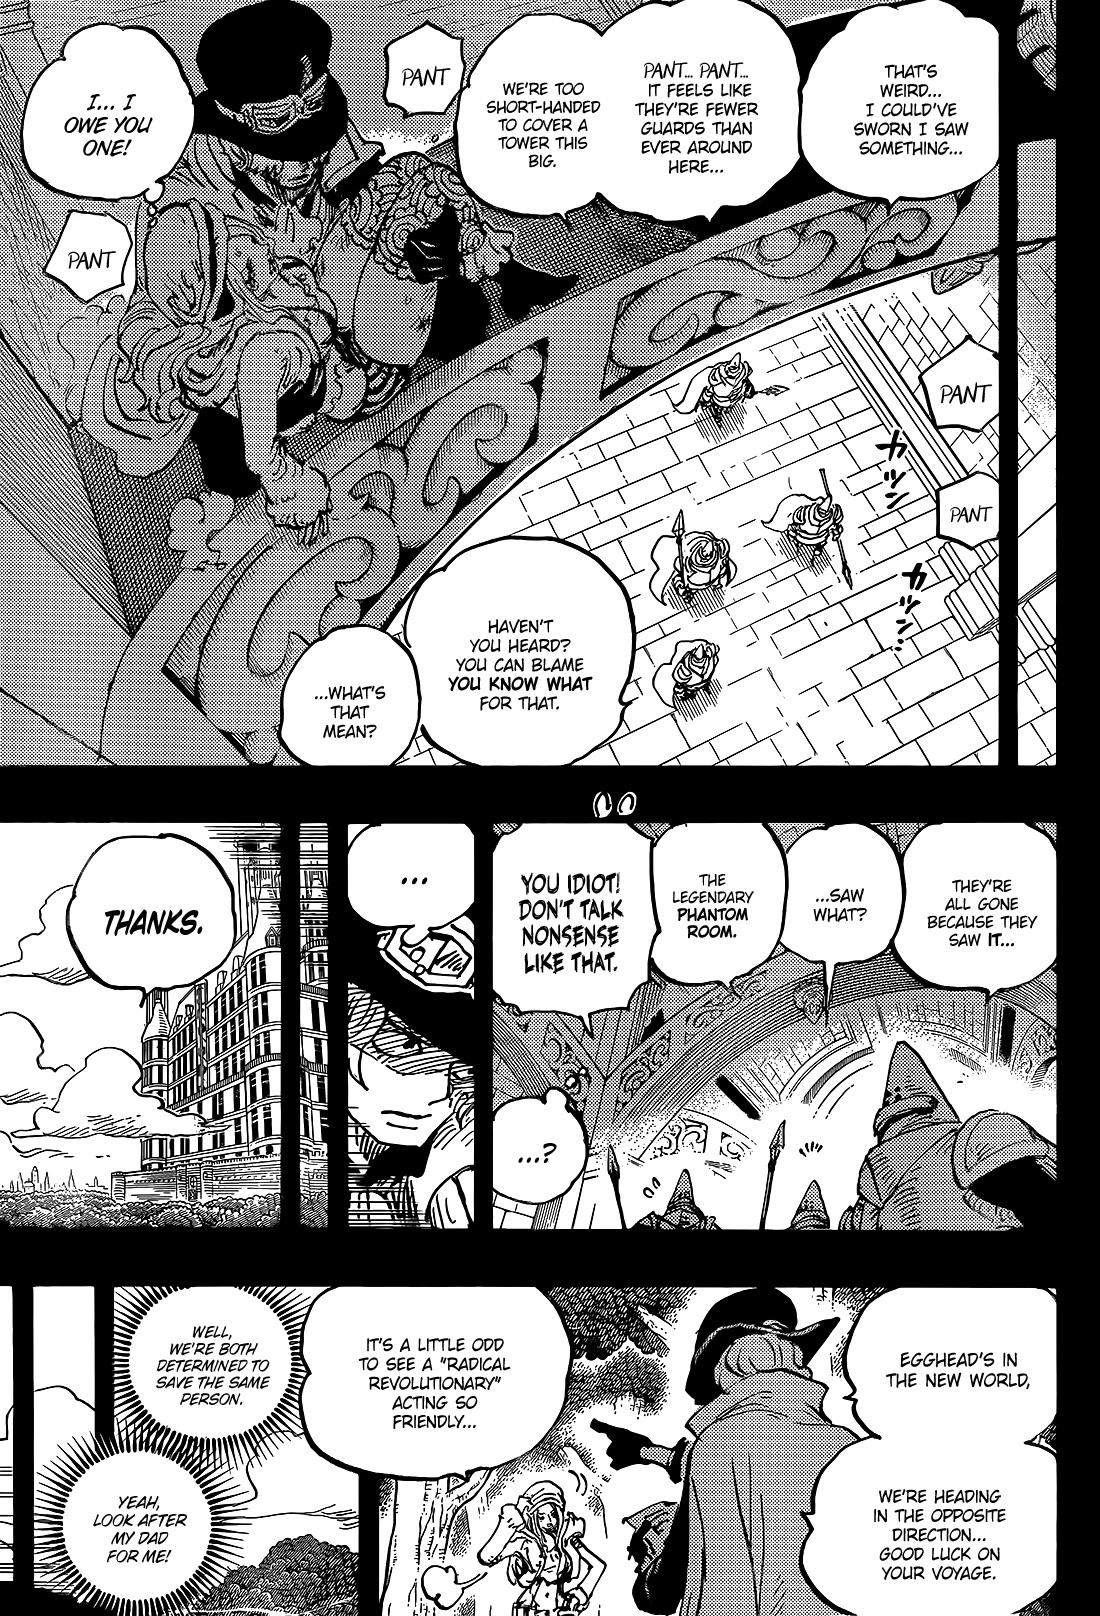 One Piece Chapter 1084: The Attempted Murder Of A Celestial Dragon page 6 - Mangakakalot